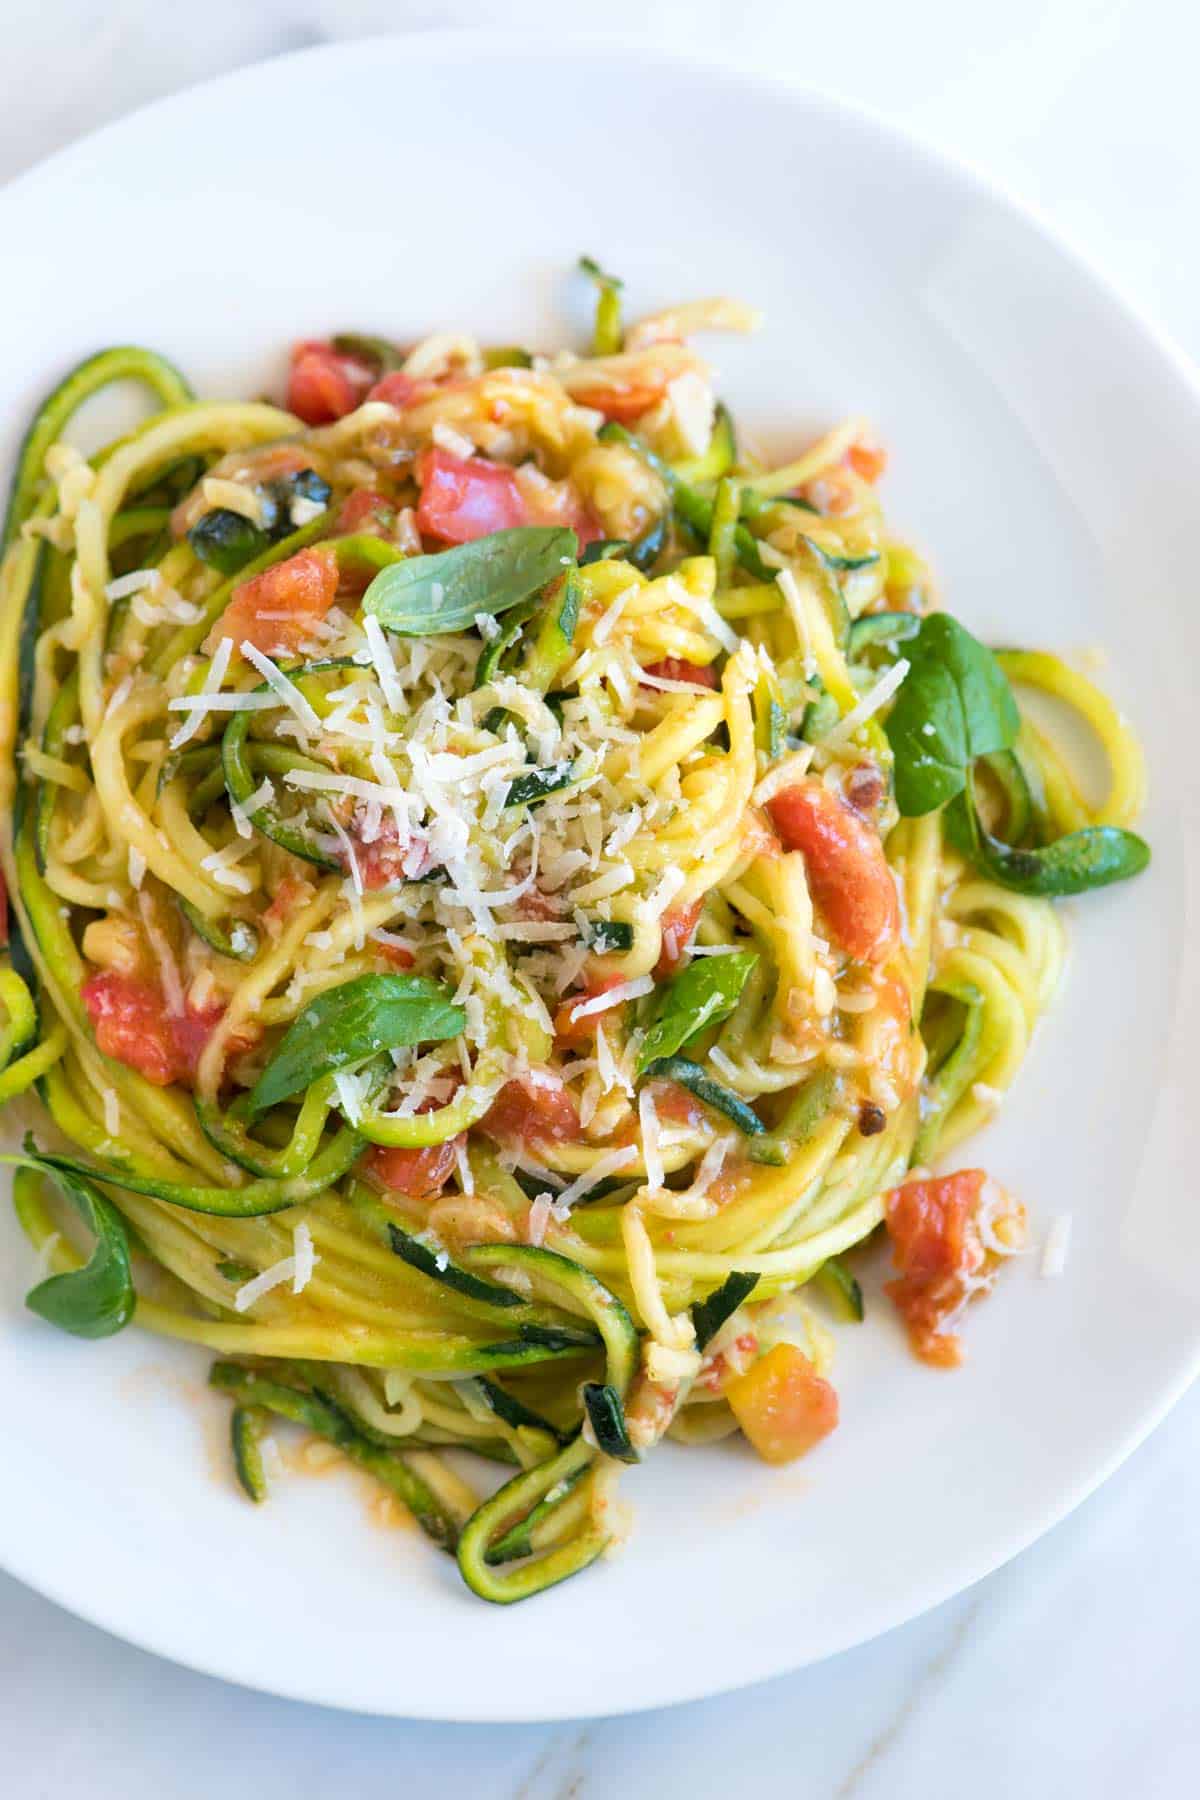 How to make zucchini noodles - A Lady Goes West